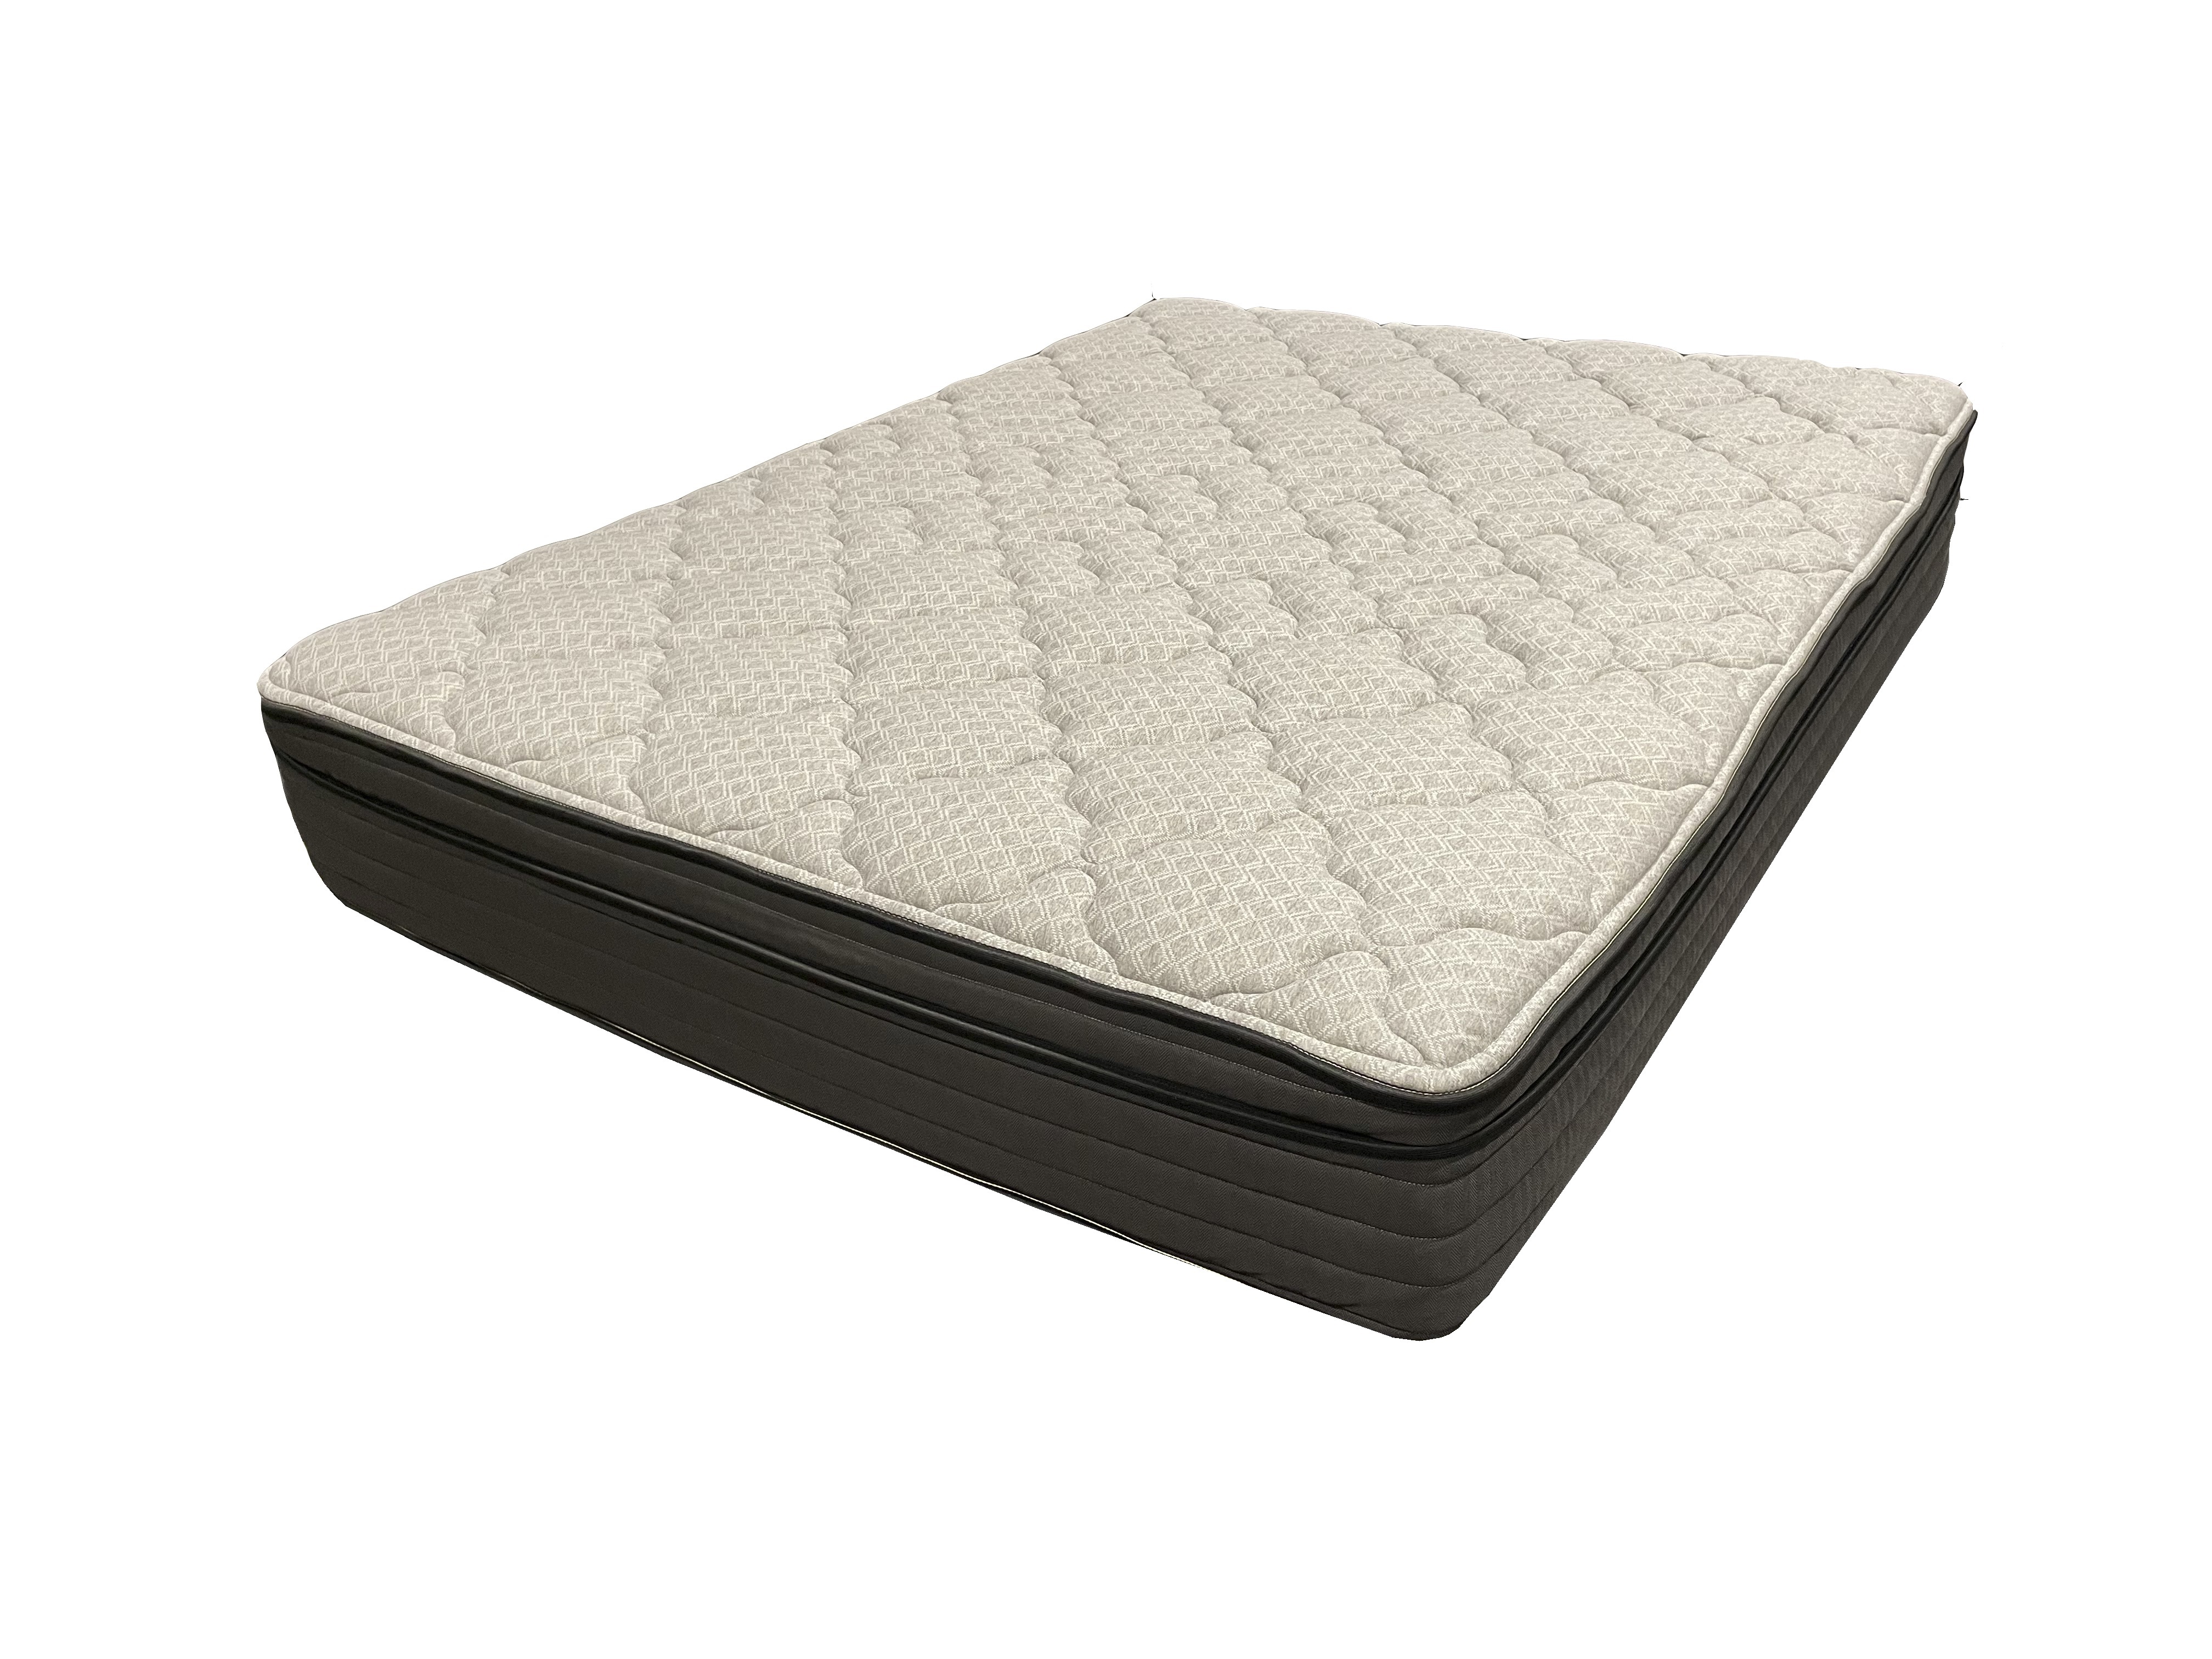 IL Sleep Products QUEEN SIZE EMPOWER EURO PILLOW TOP HYBRID MATTRESS